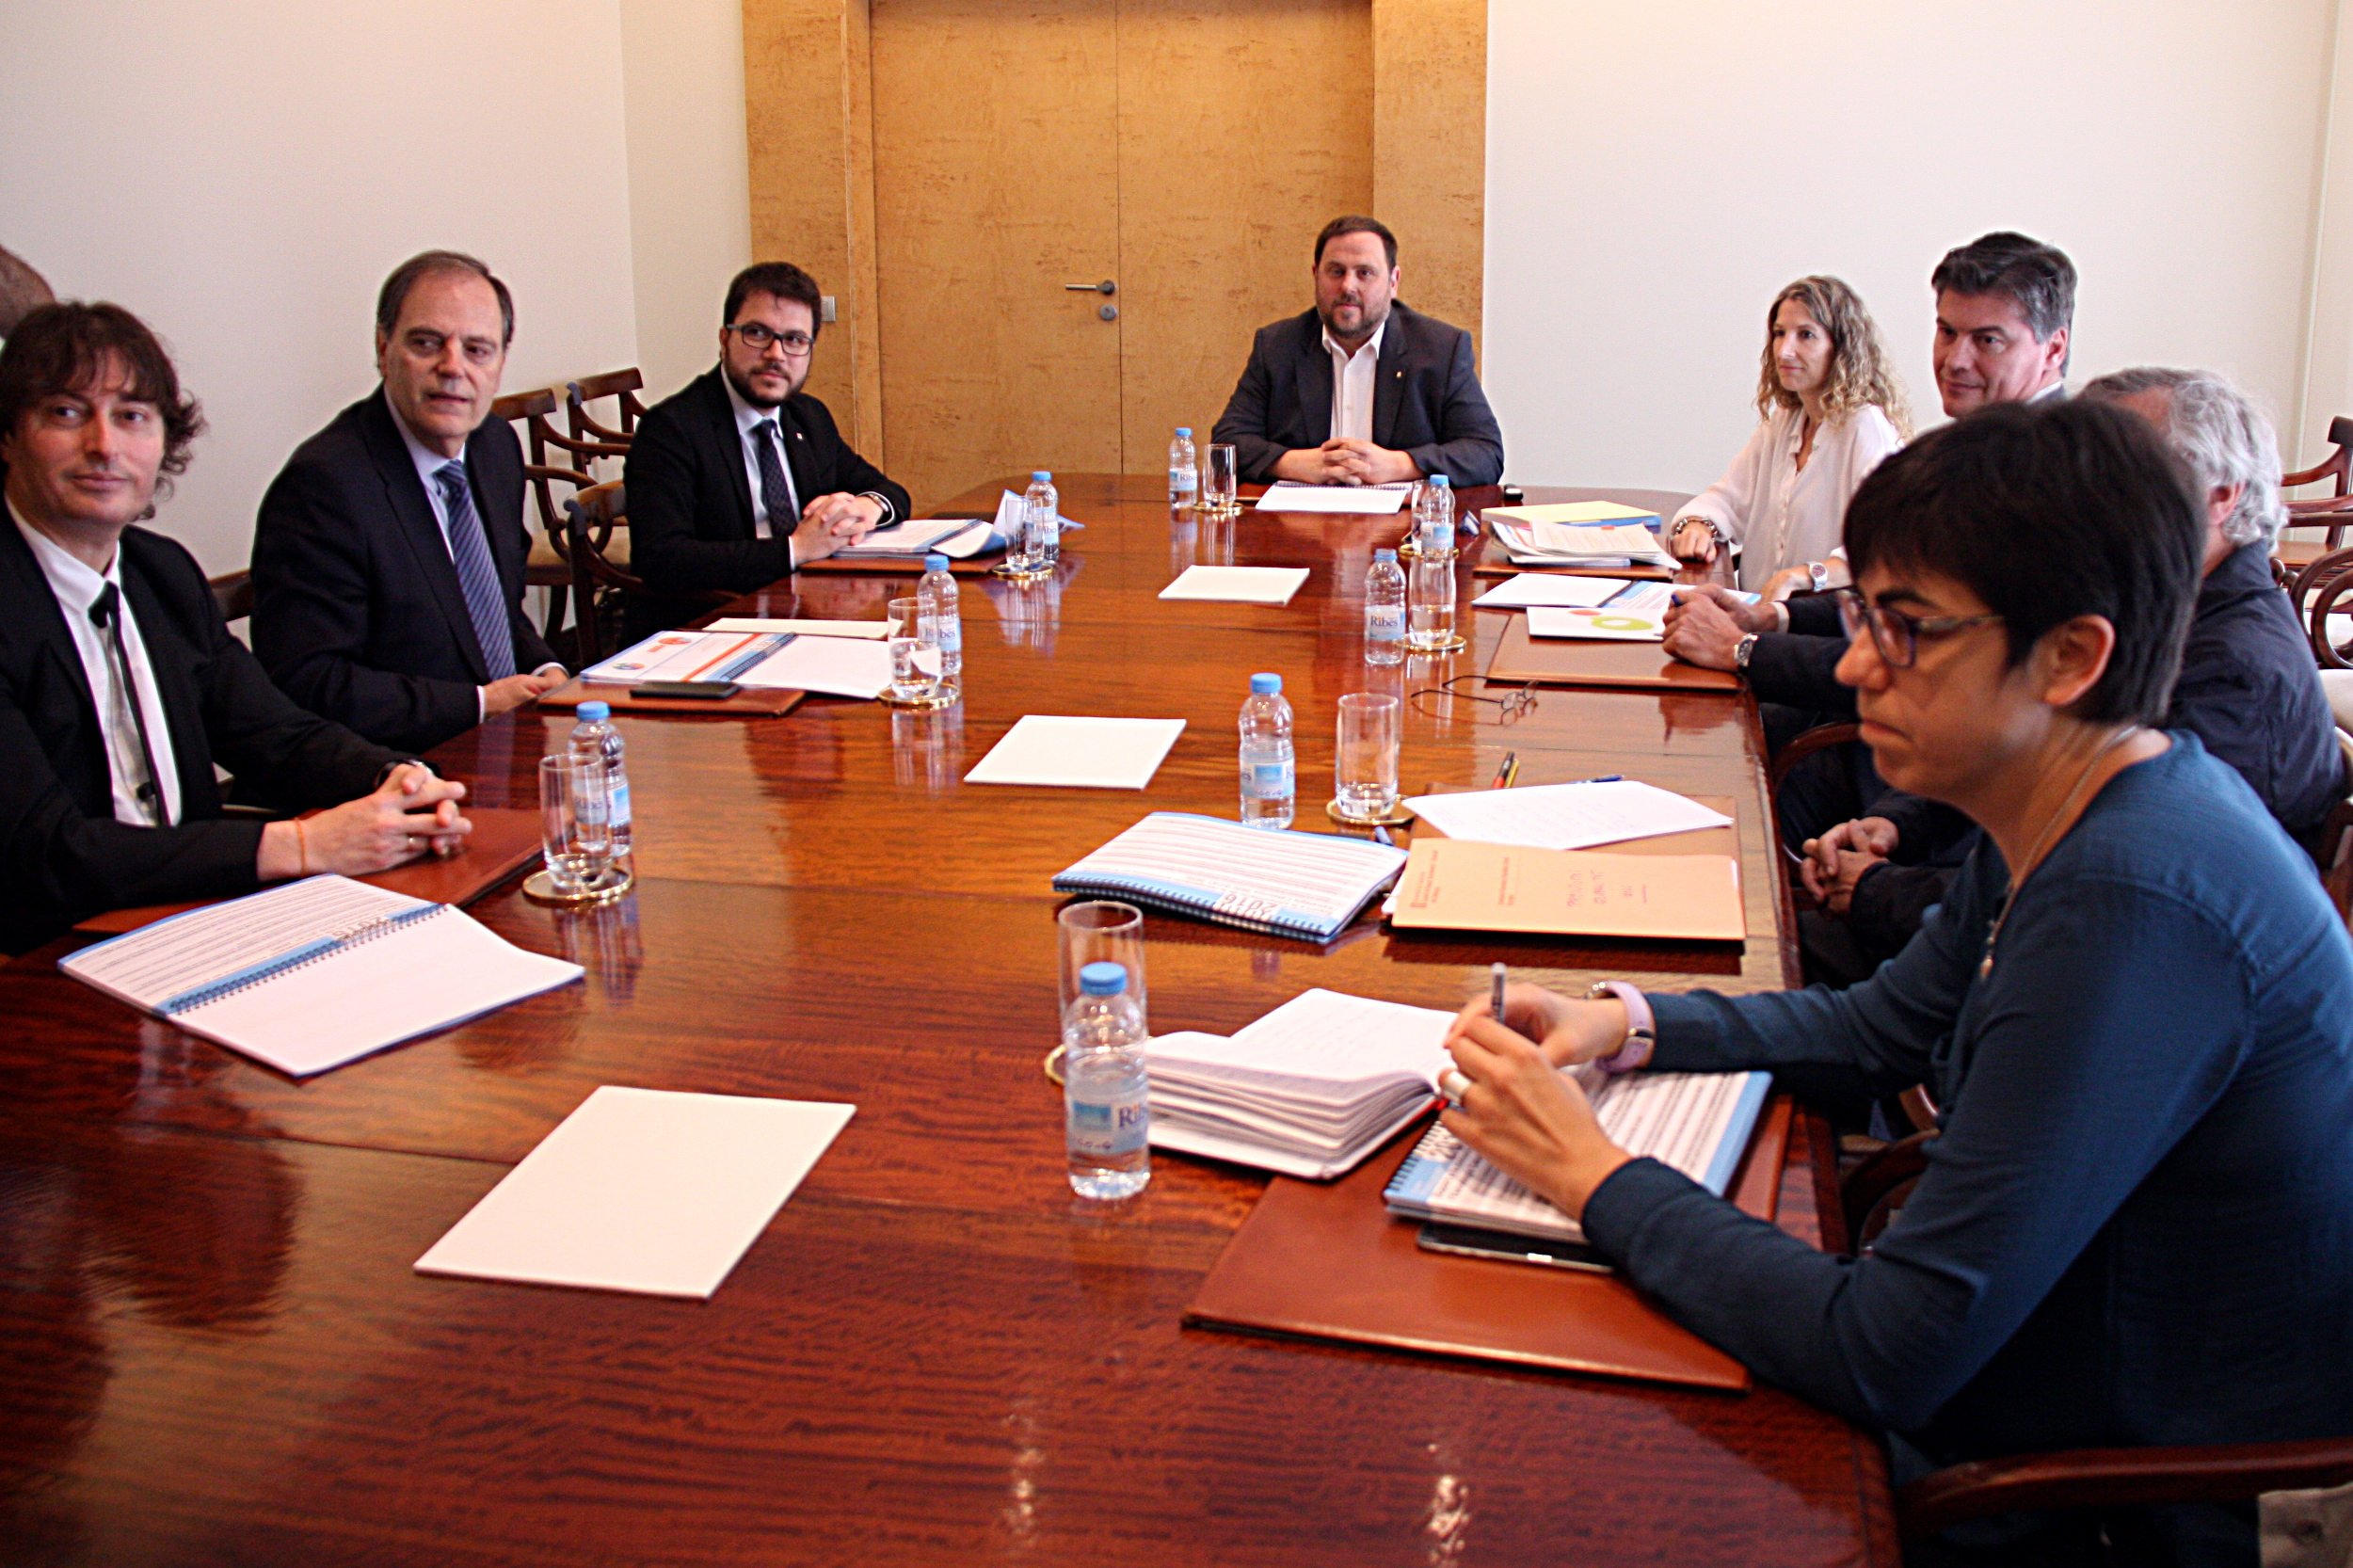 Catalan vice president and Catalan Minister for Economy and Tax Agency, Oriol Junqueras presenting the draft budget to the social entities (by ACN)